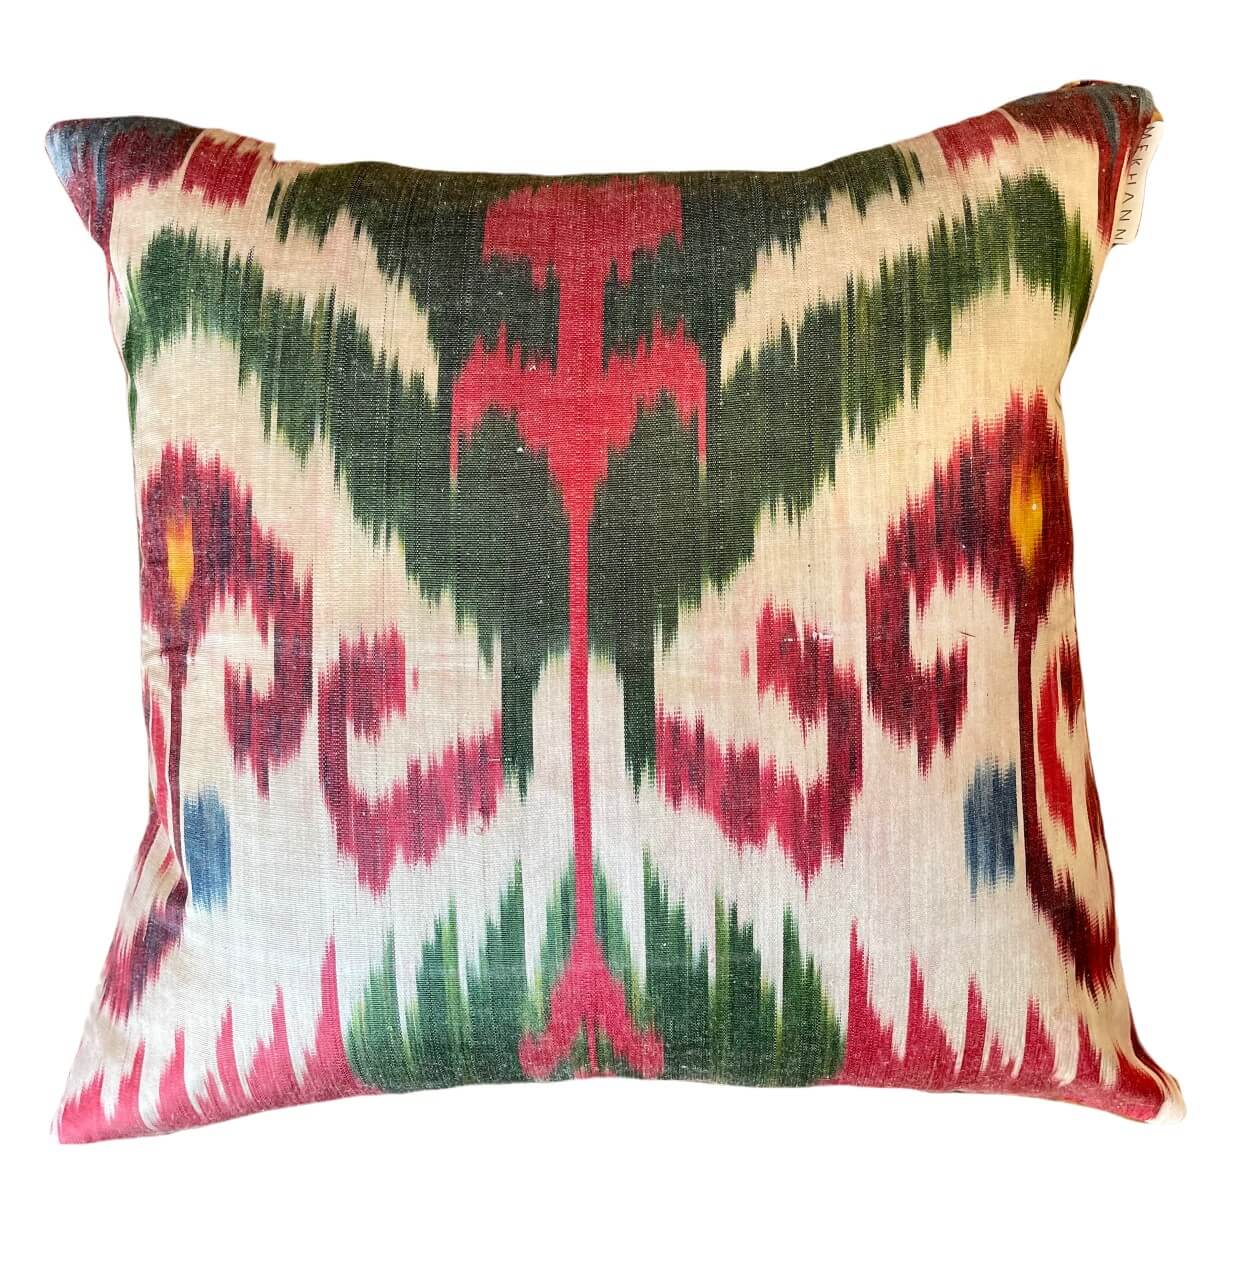 Embroidered Silk & Ikat Pillow - Beige, Green, Red, Blue